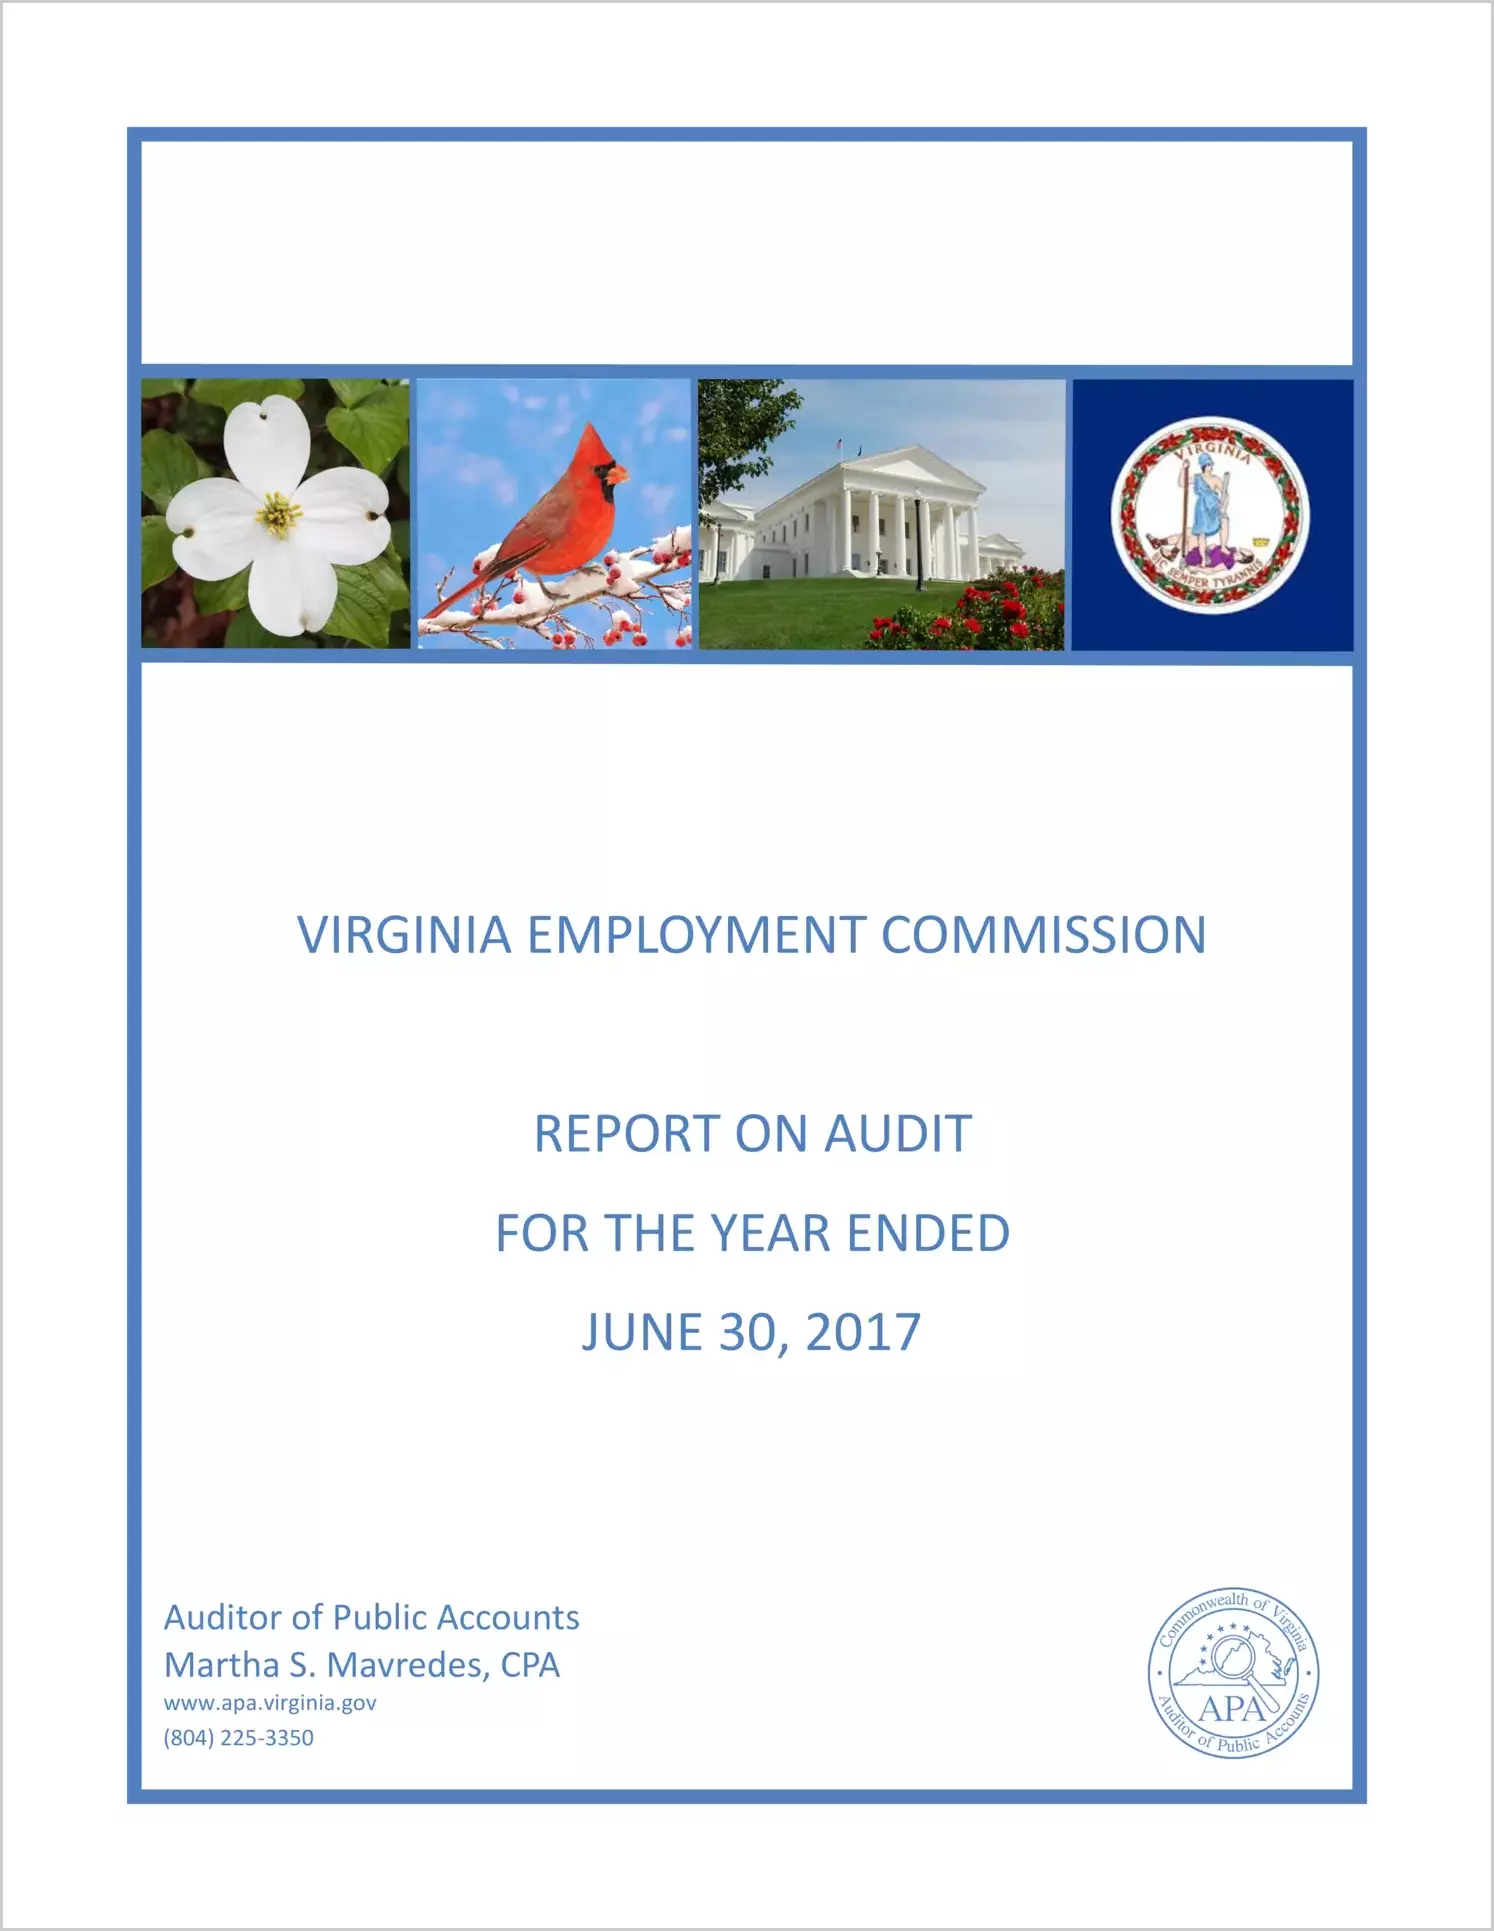 Virginia Employment Commission for the year ended June 30, 2017